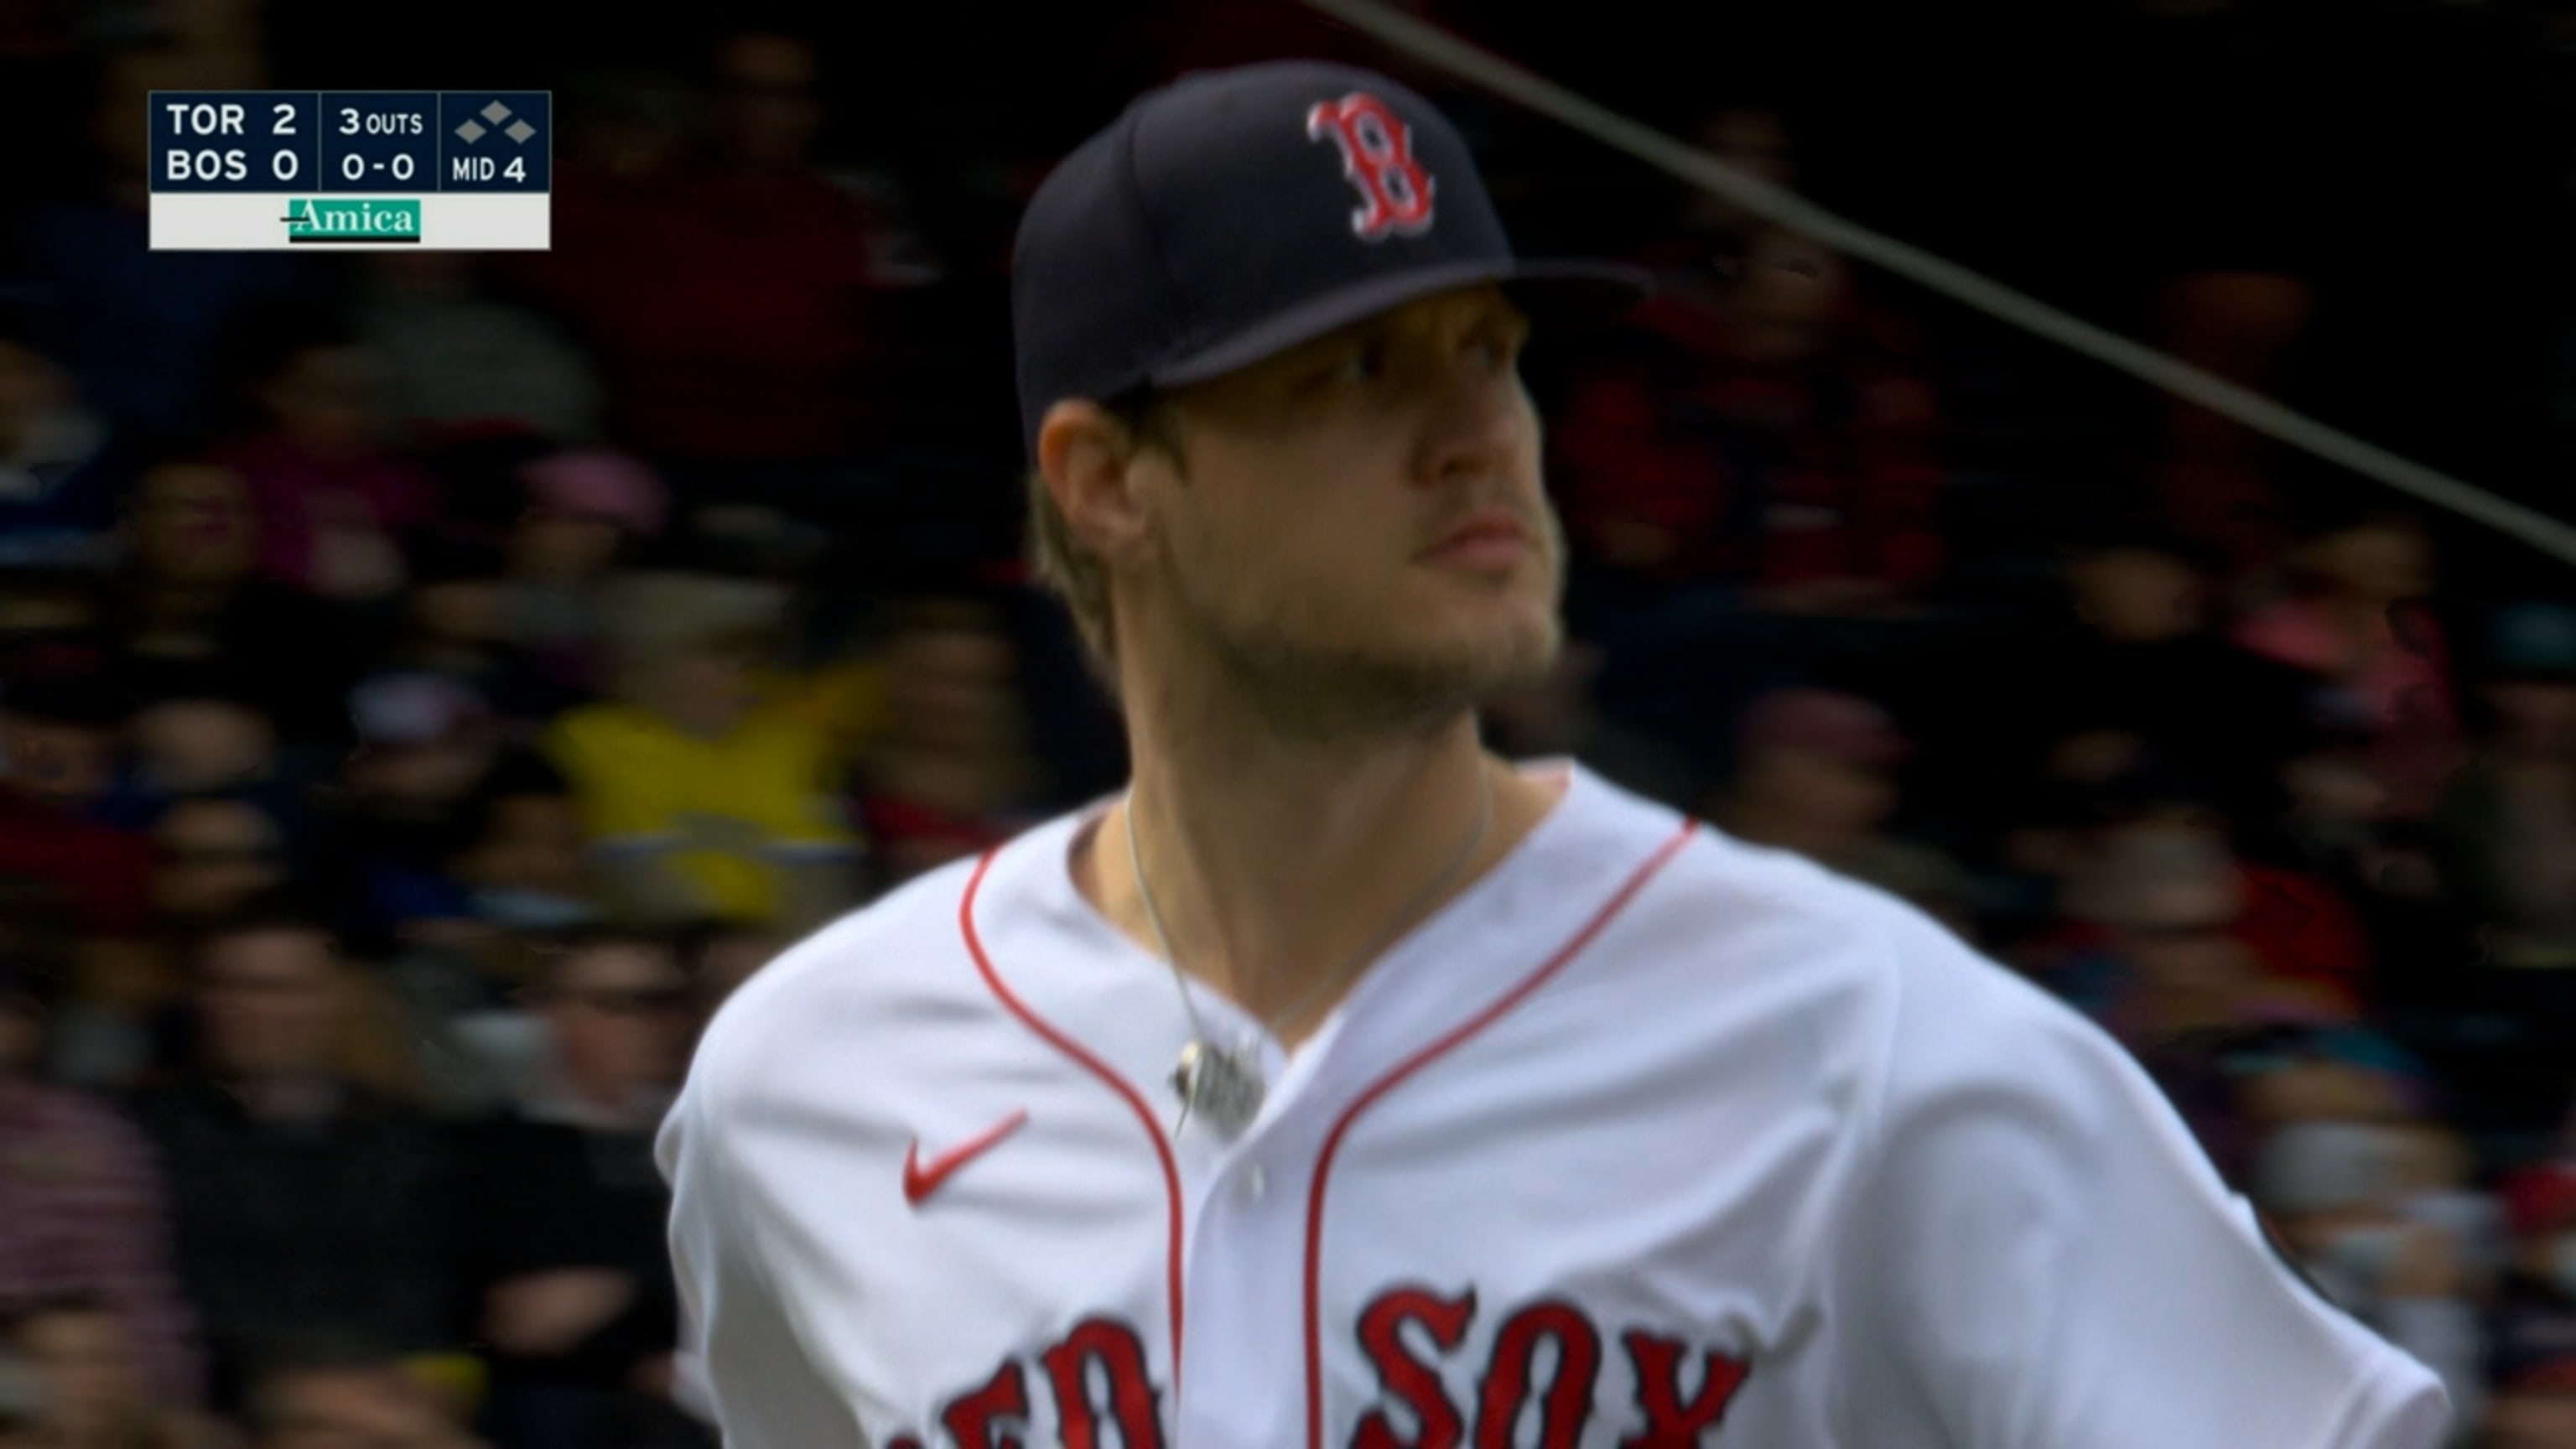 BALTIMORE, MD - APRIL 26: Boston Red Sox starting pitcher Tanner